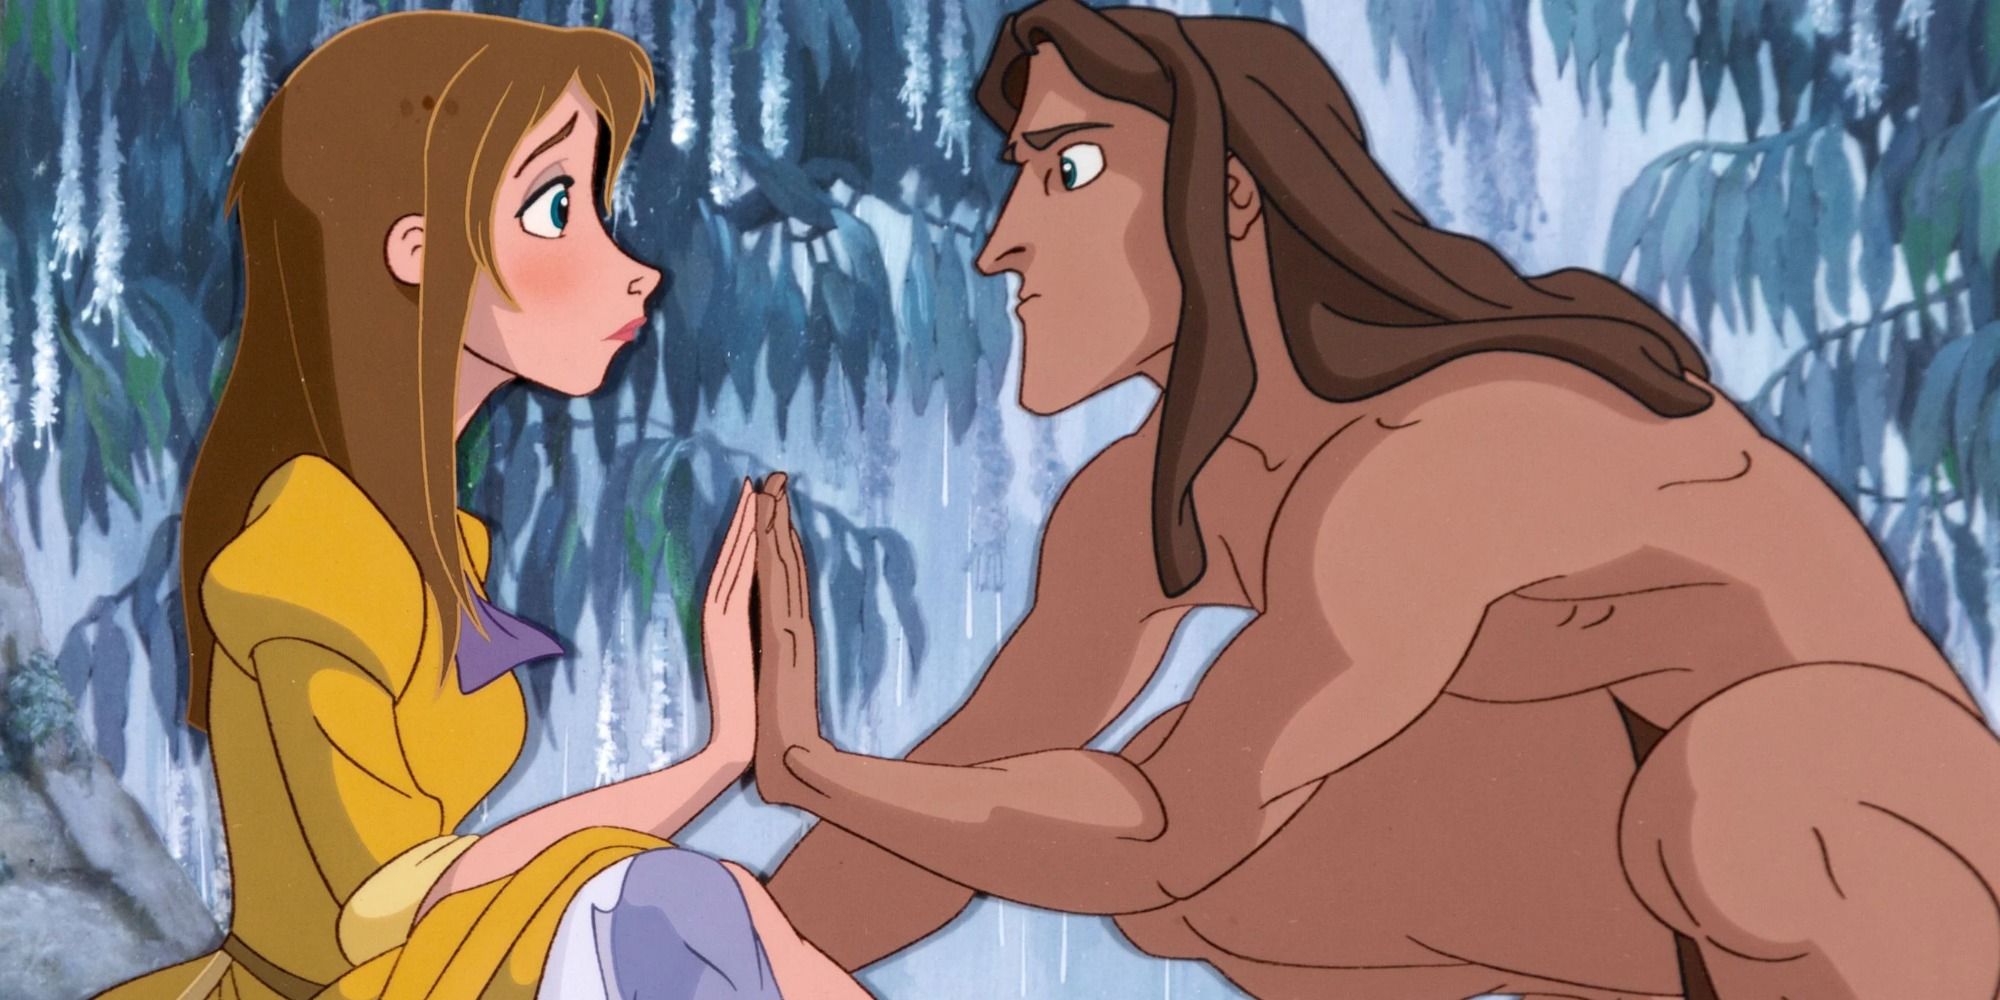 Jane and Tarzan placing their hands together 